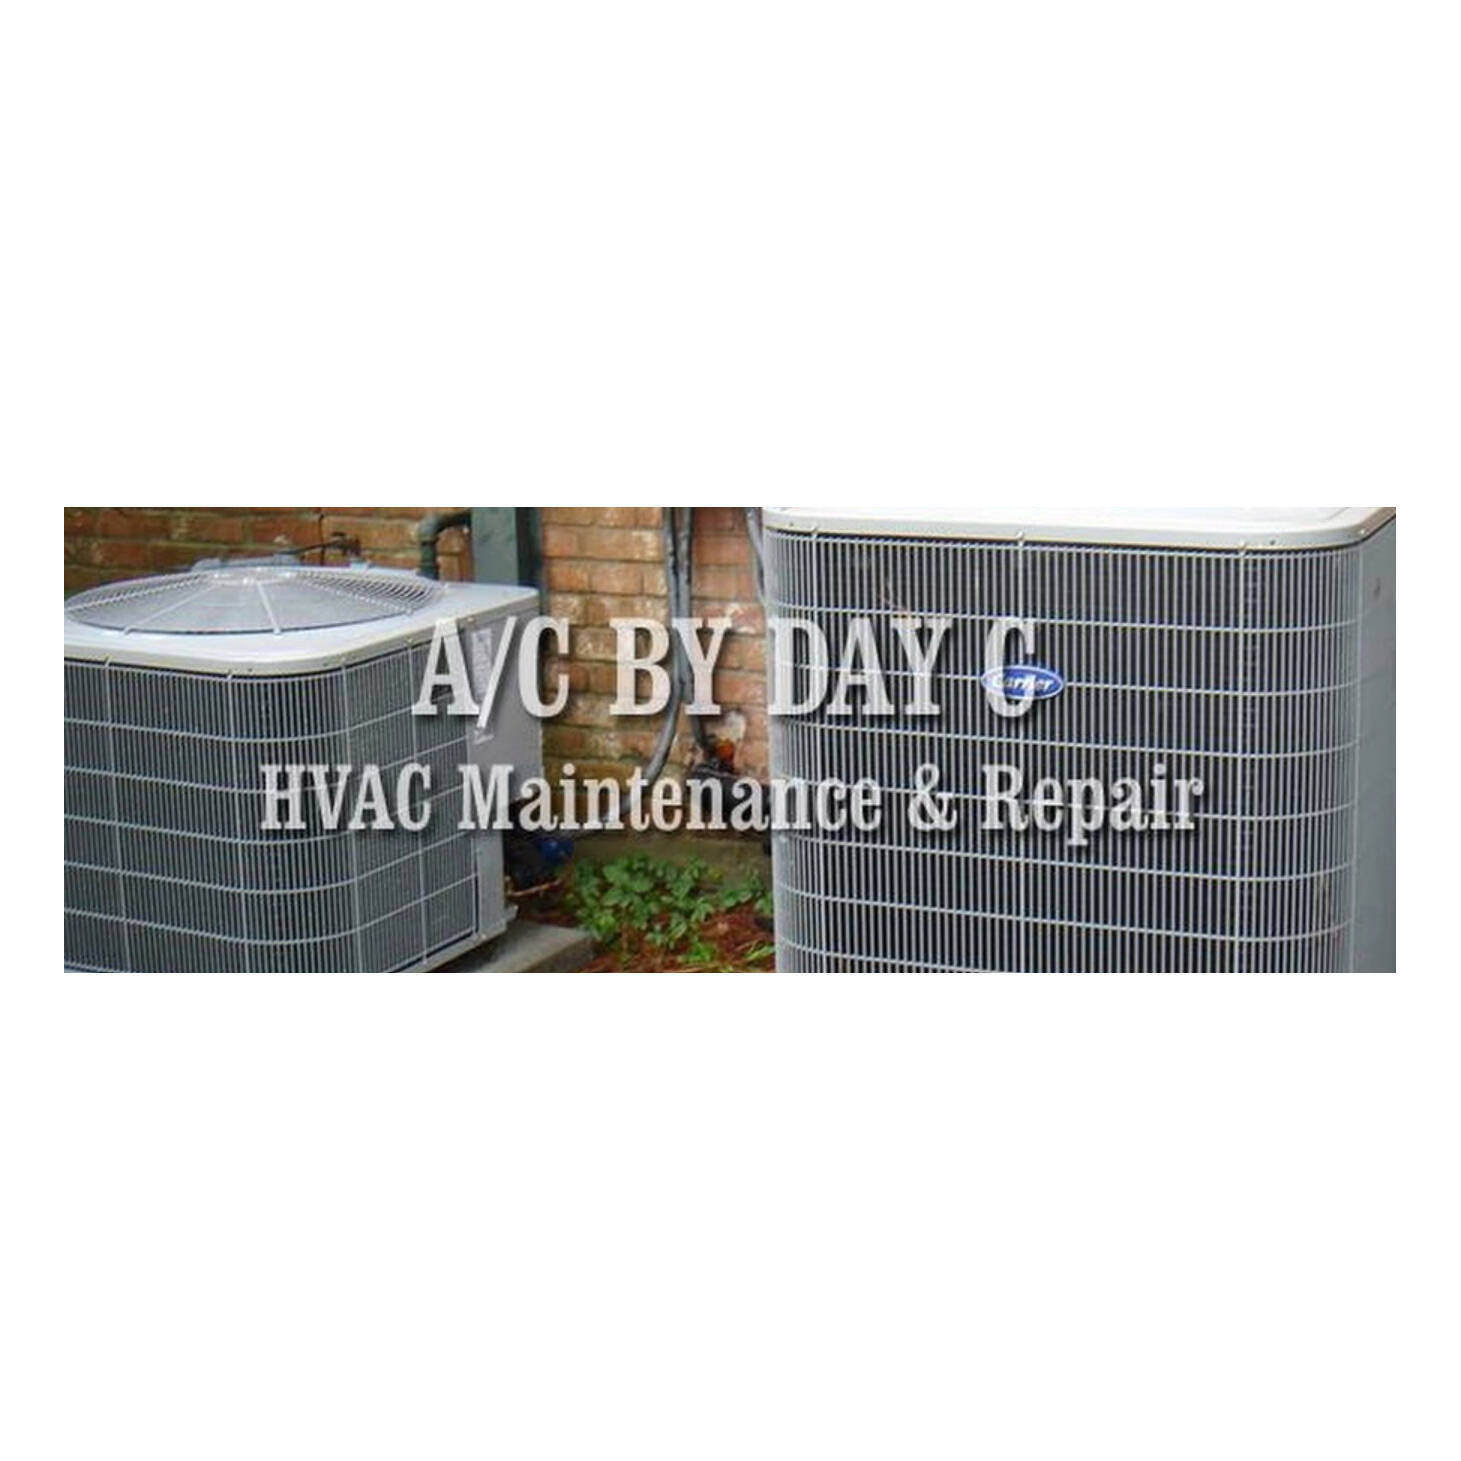 A/C by Day C 